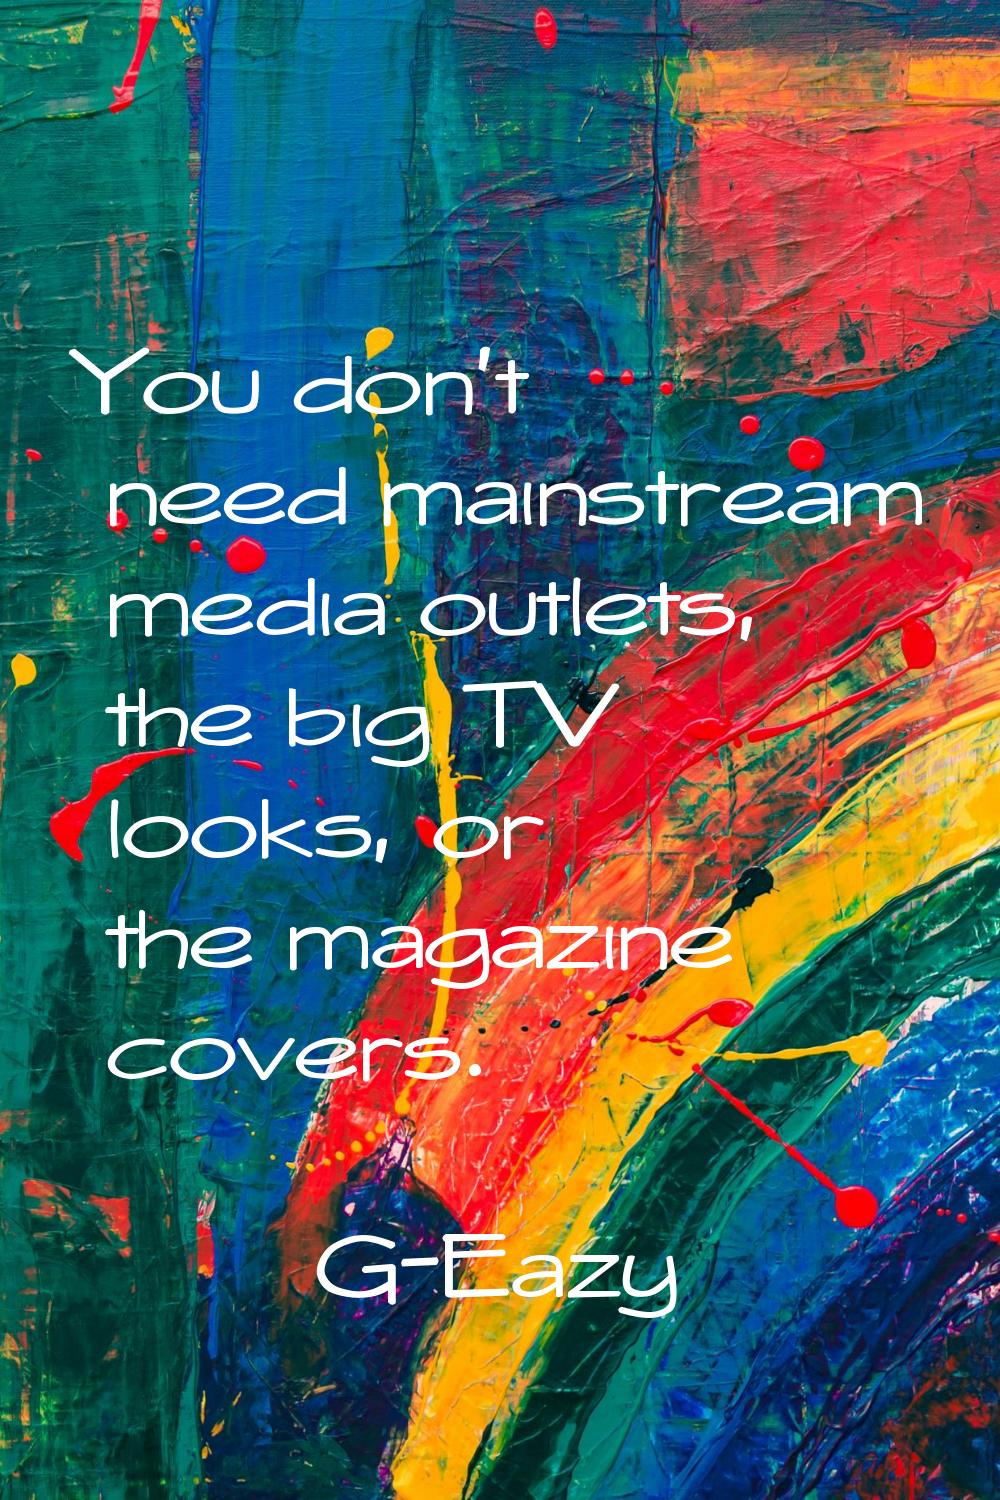 You don't need mainstream media outlets, the big TV looks, or the magazine covers.